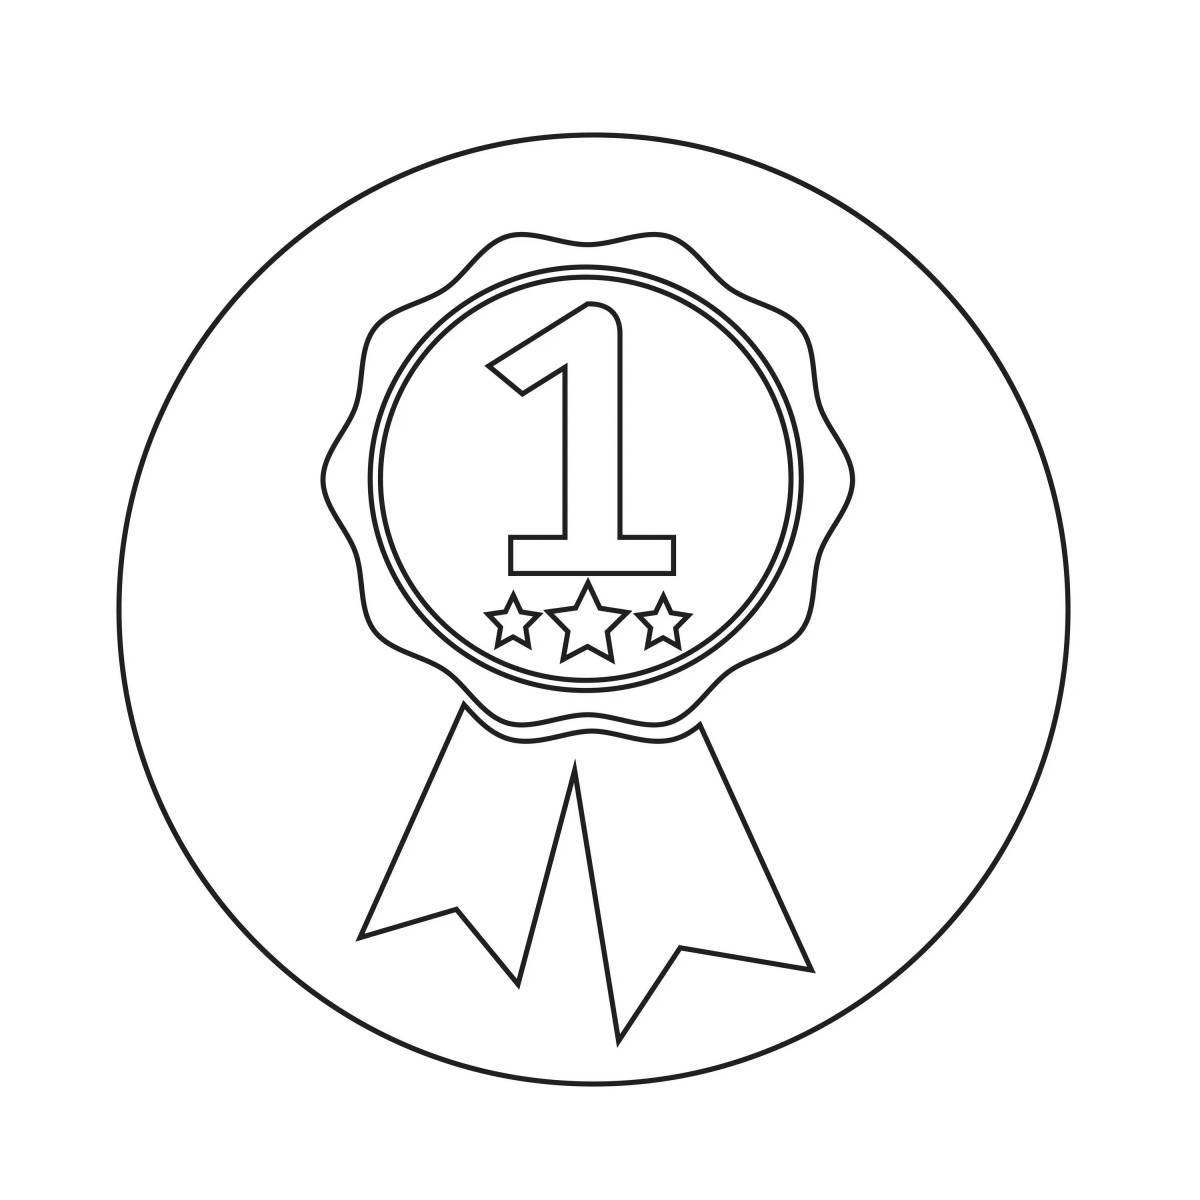 Coloring page dazzling medal February 23